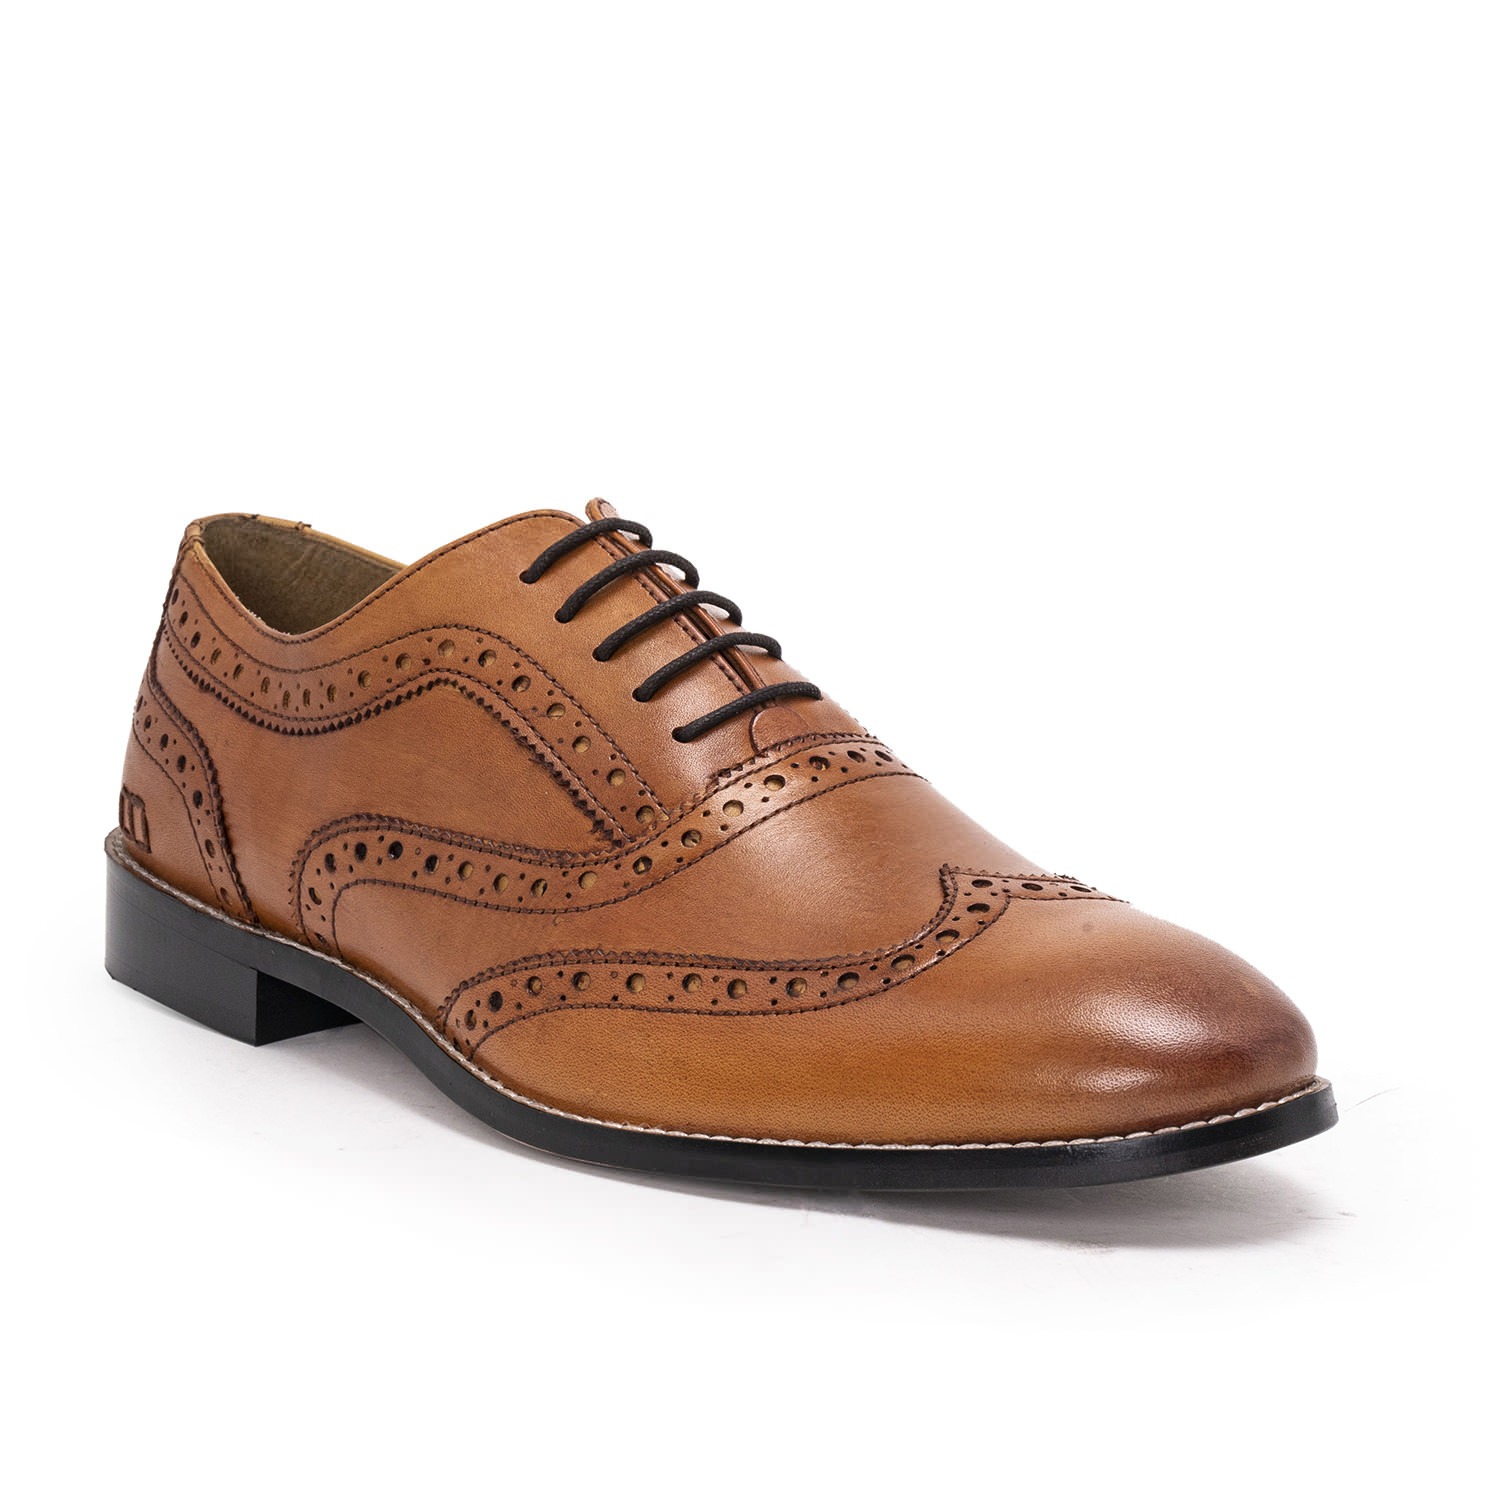 Genuine Leather Brogues Shoes